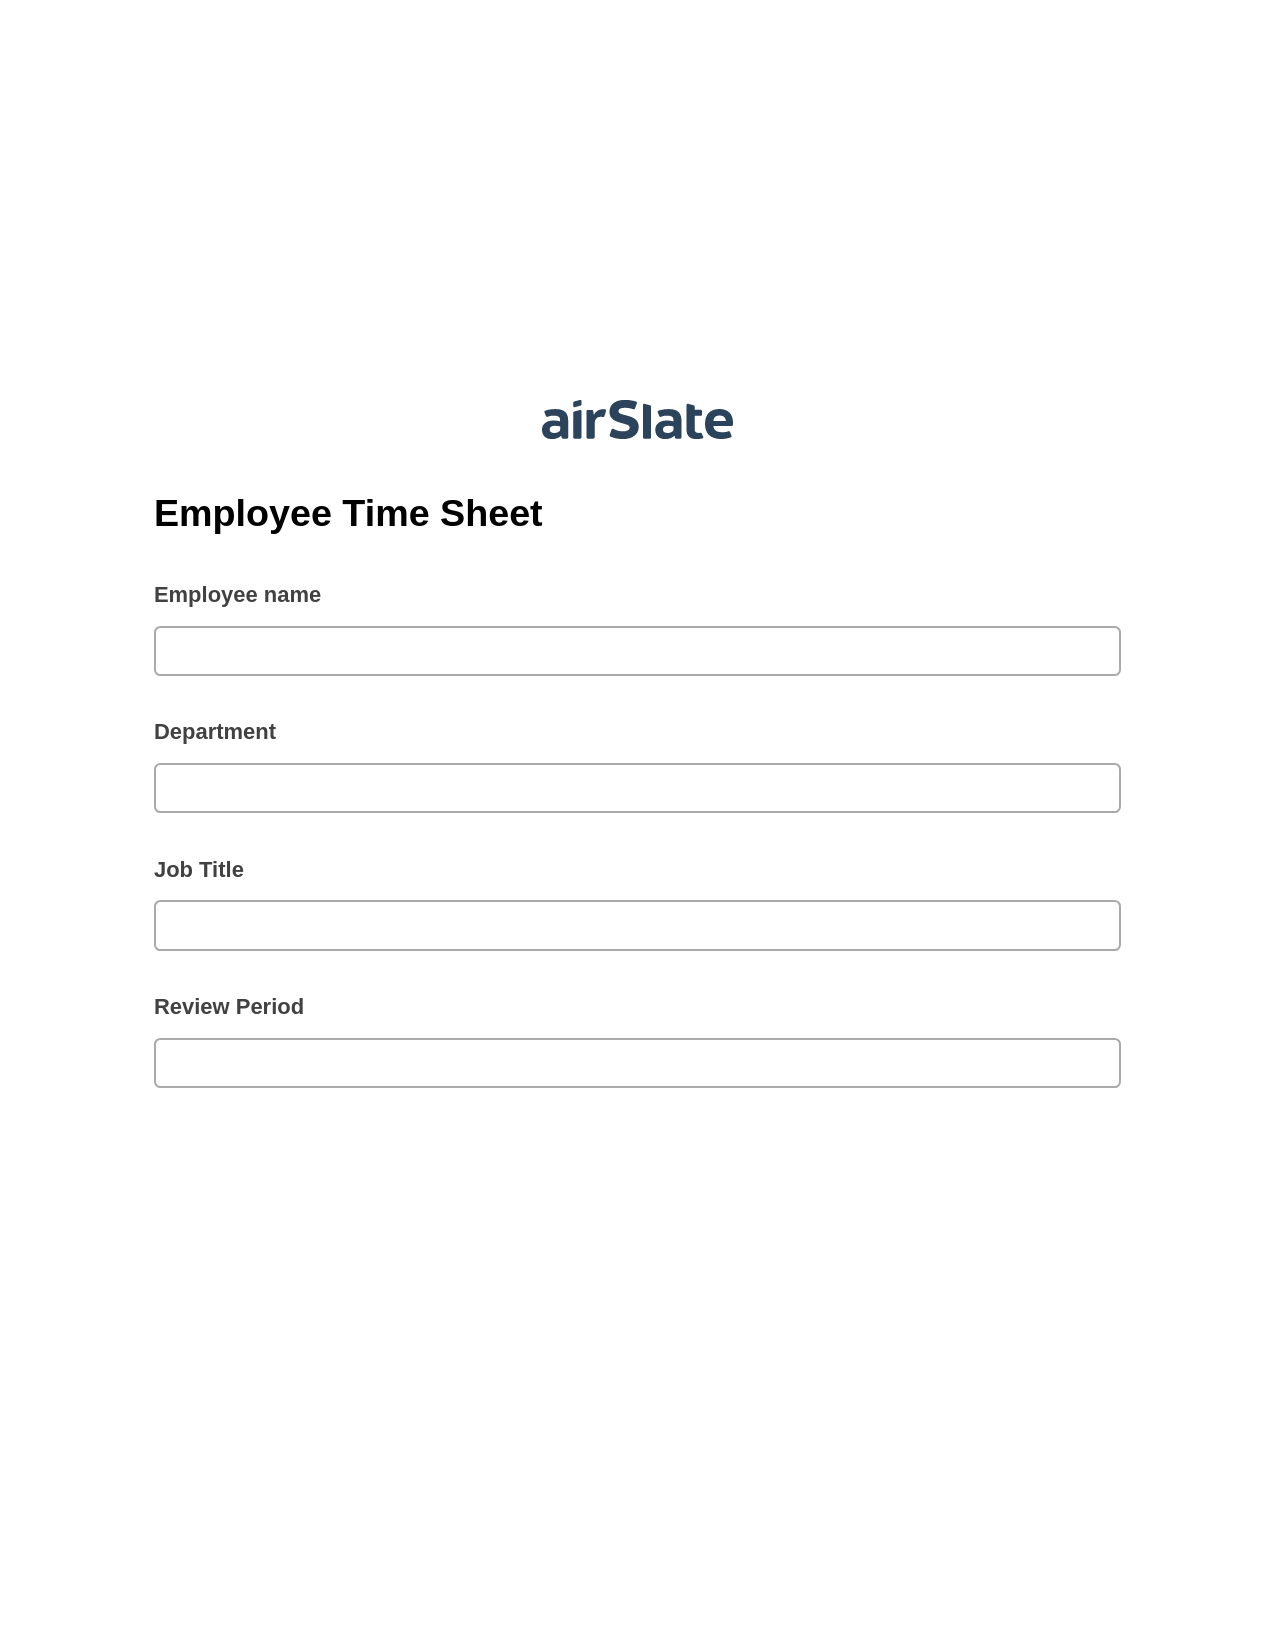 Multirole Employee Time Sheet Pre-fill from MS Dynamics 365 Records, Create Salesforce Records Bot, Export to Smartsheet